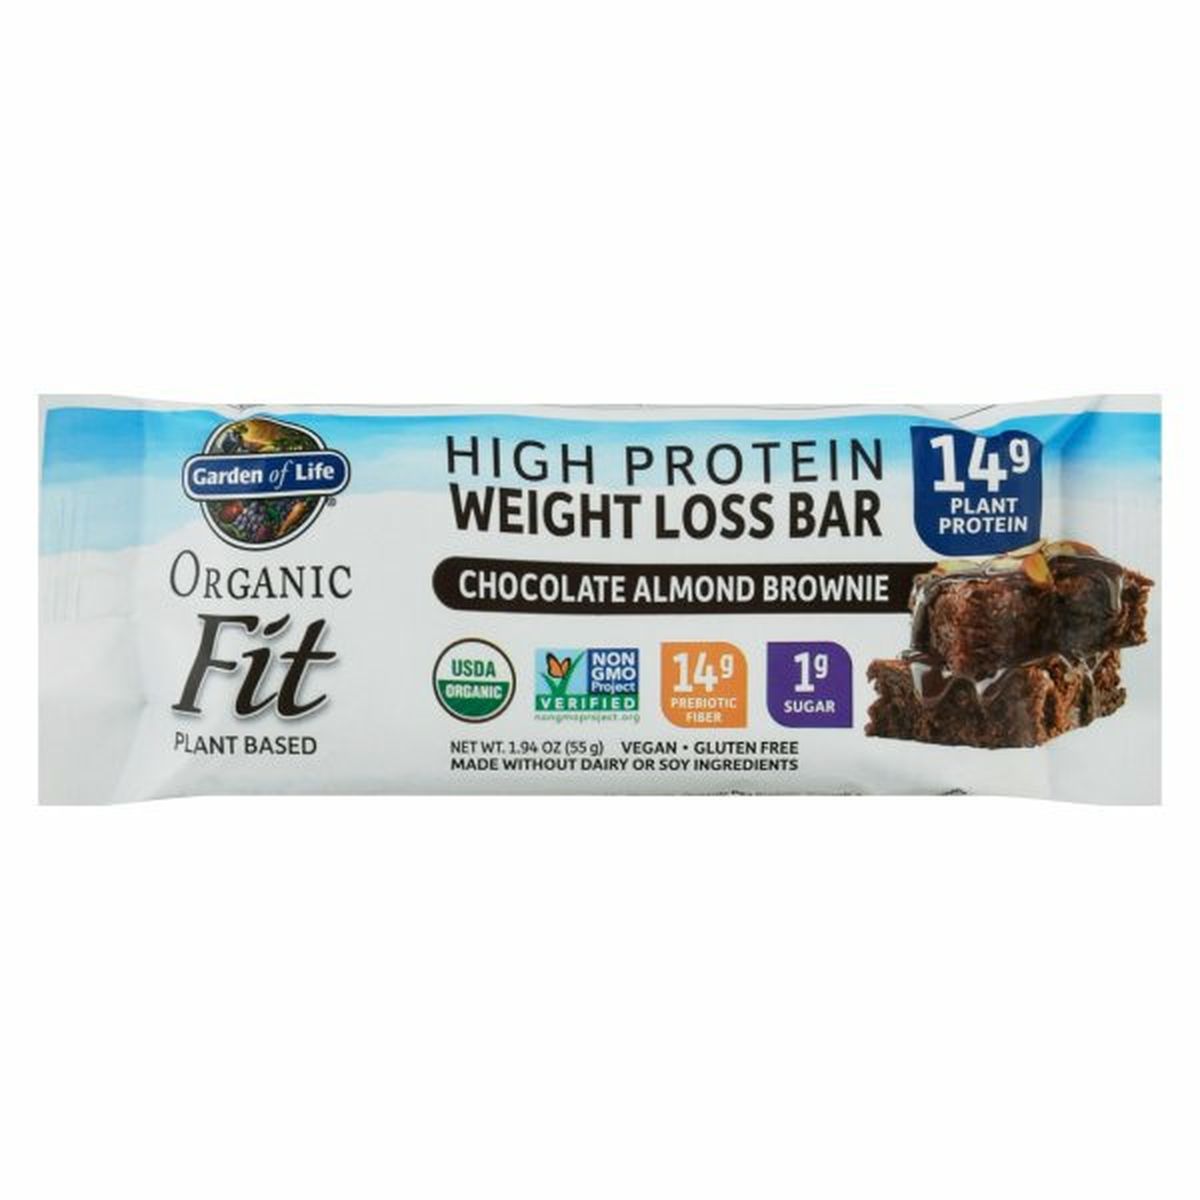 Calories in Garden of Life Organic Fit Weight Loss Bar, High Protein, Chocolate Almond Brownie